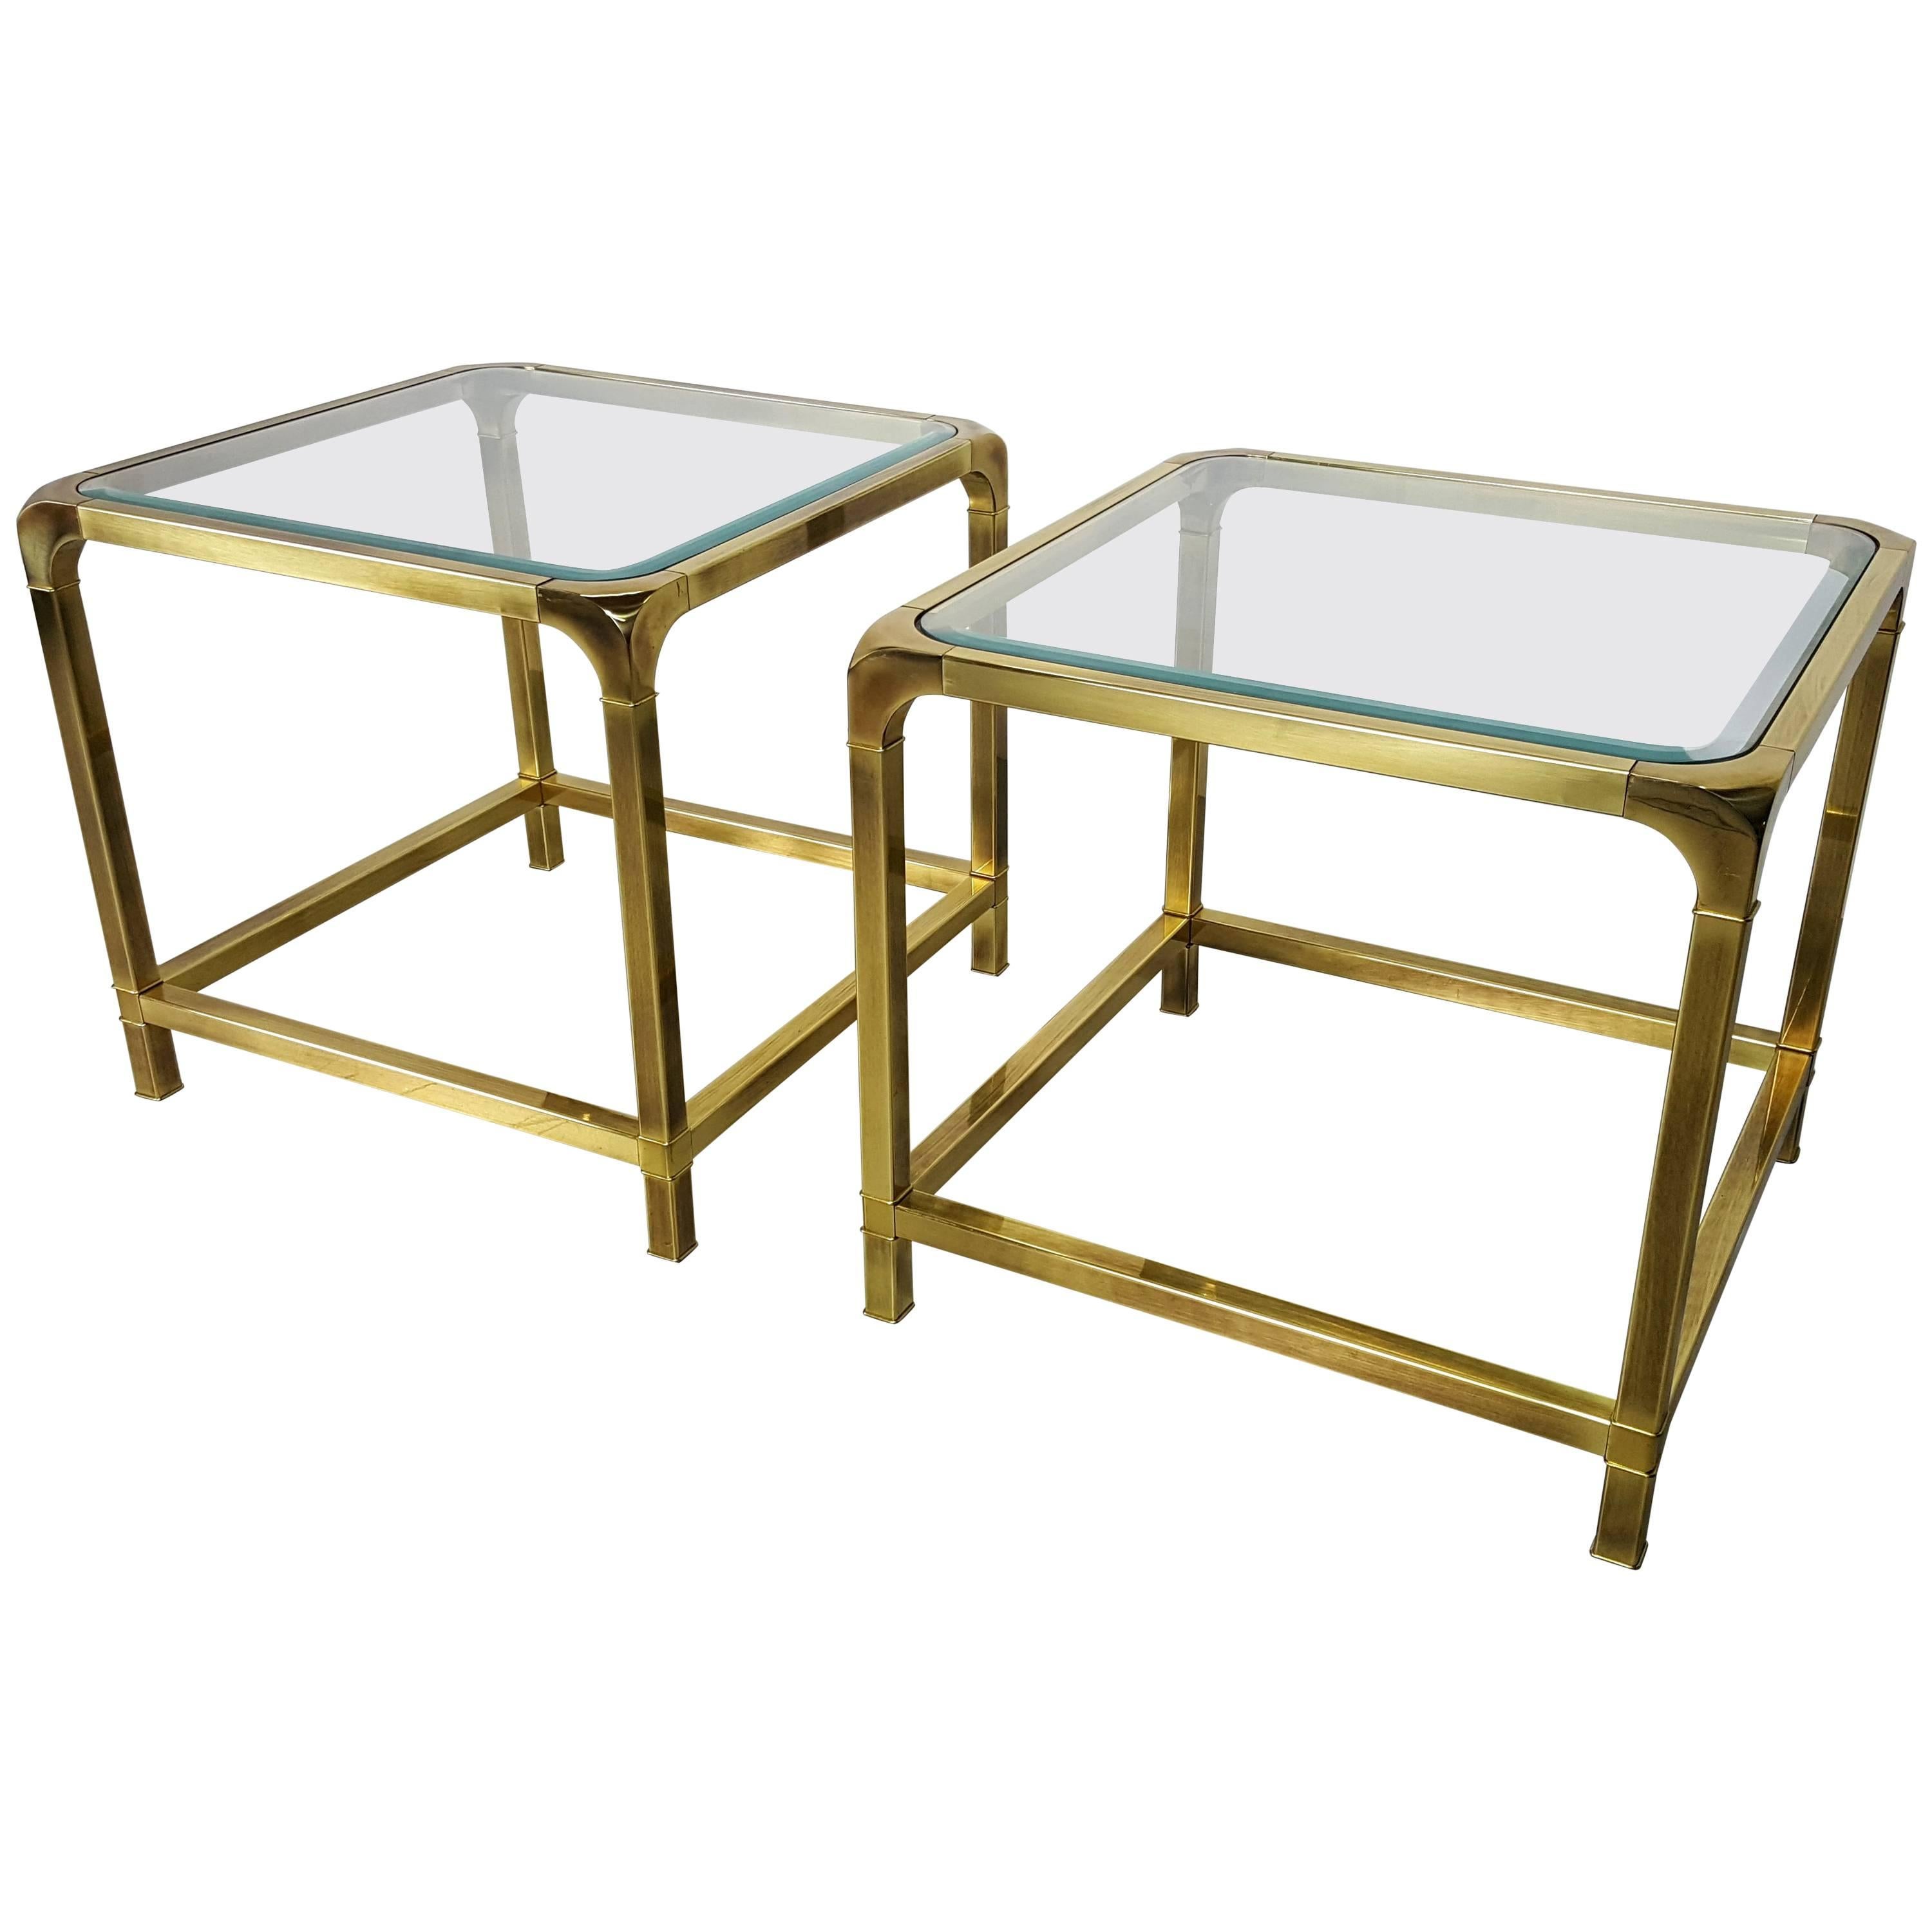 Pair of Large Patinated Brass End Tables by Mastercraft, 1970s